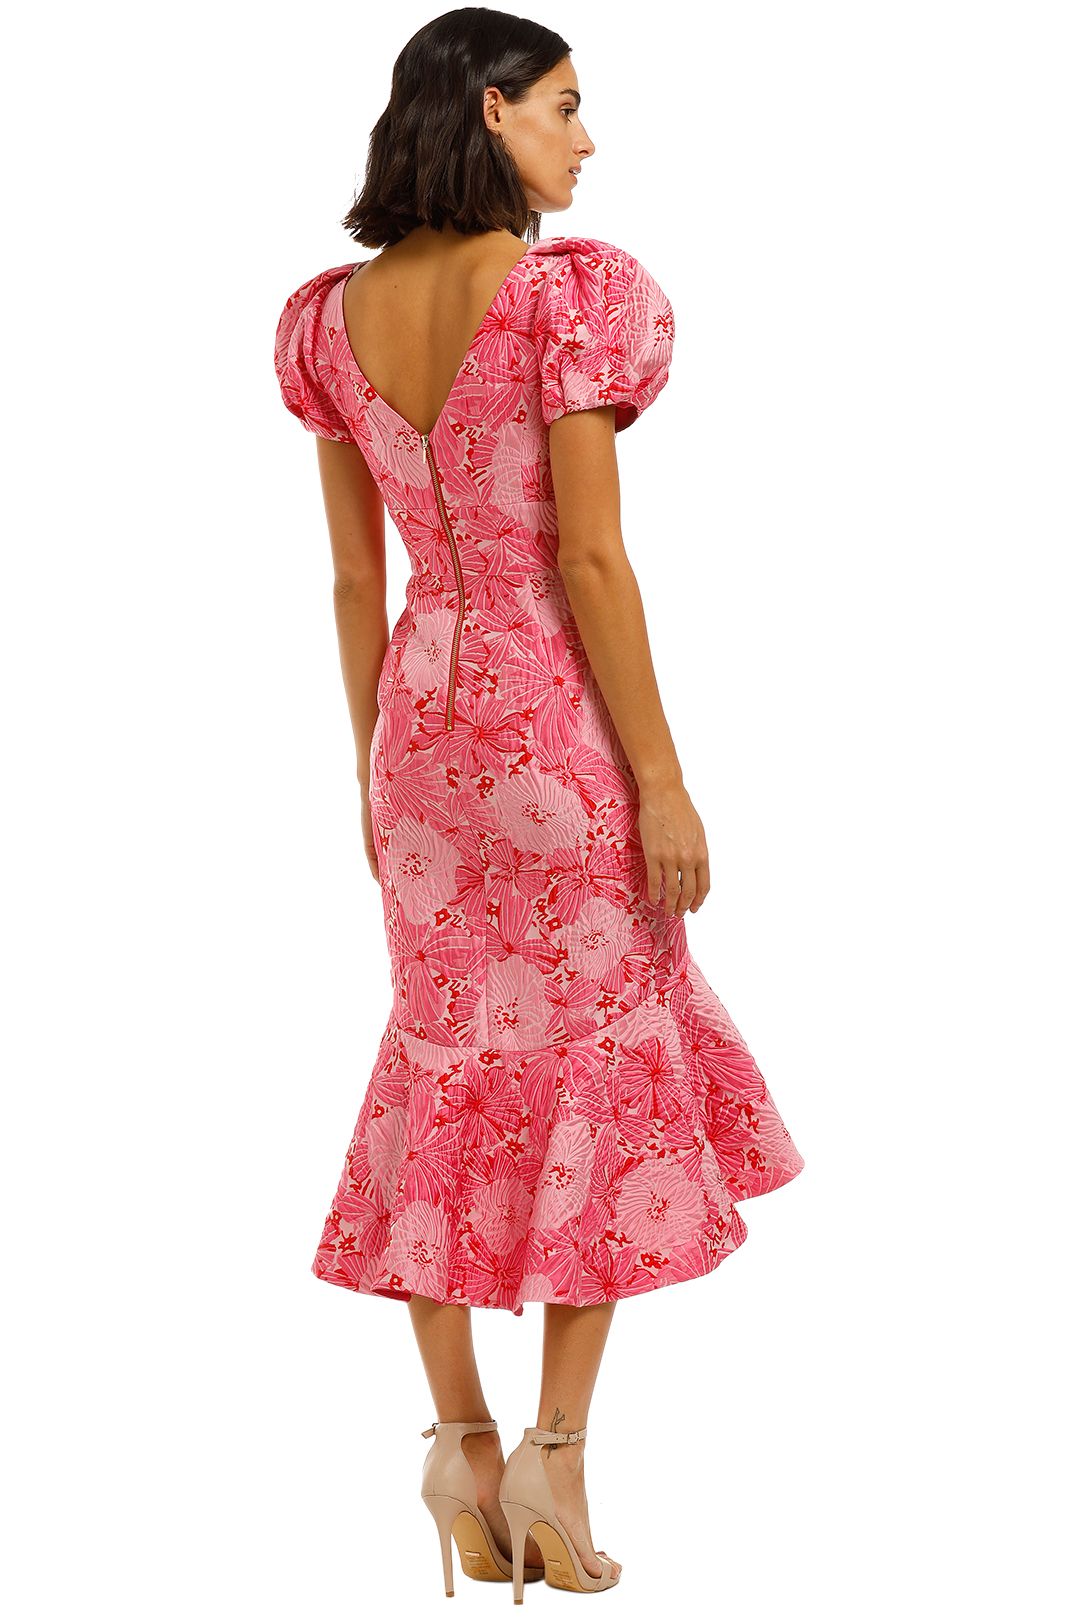 Love-Honor-Argento-Midi-Pink-Floral-Back